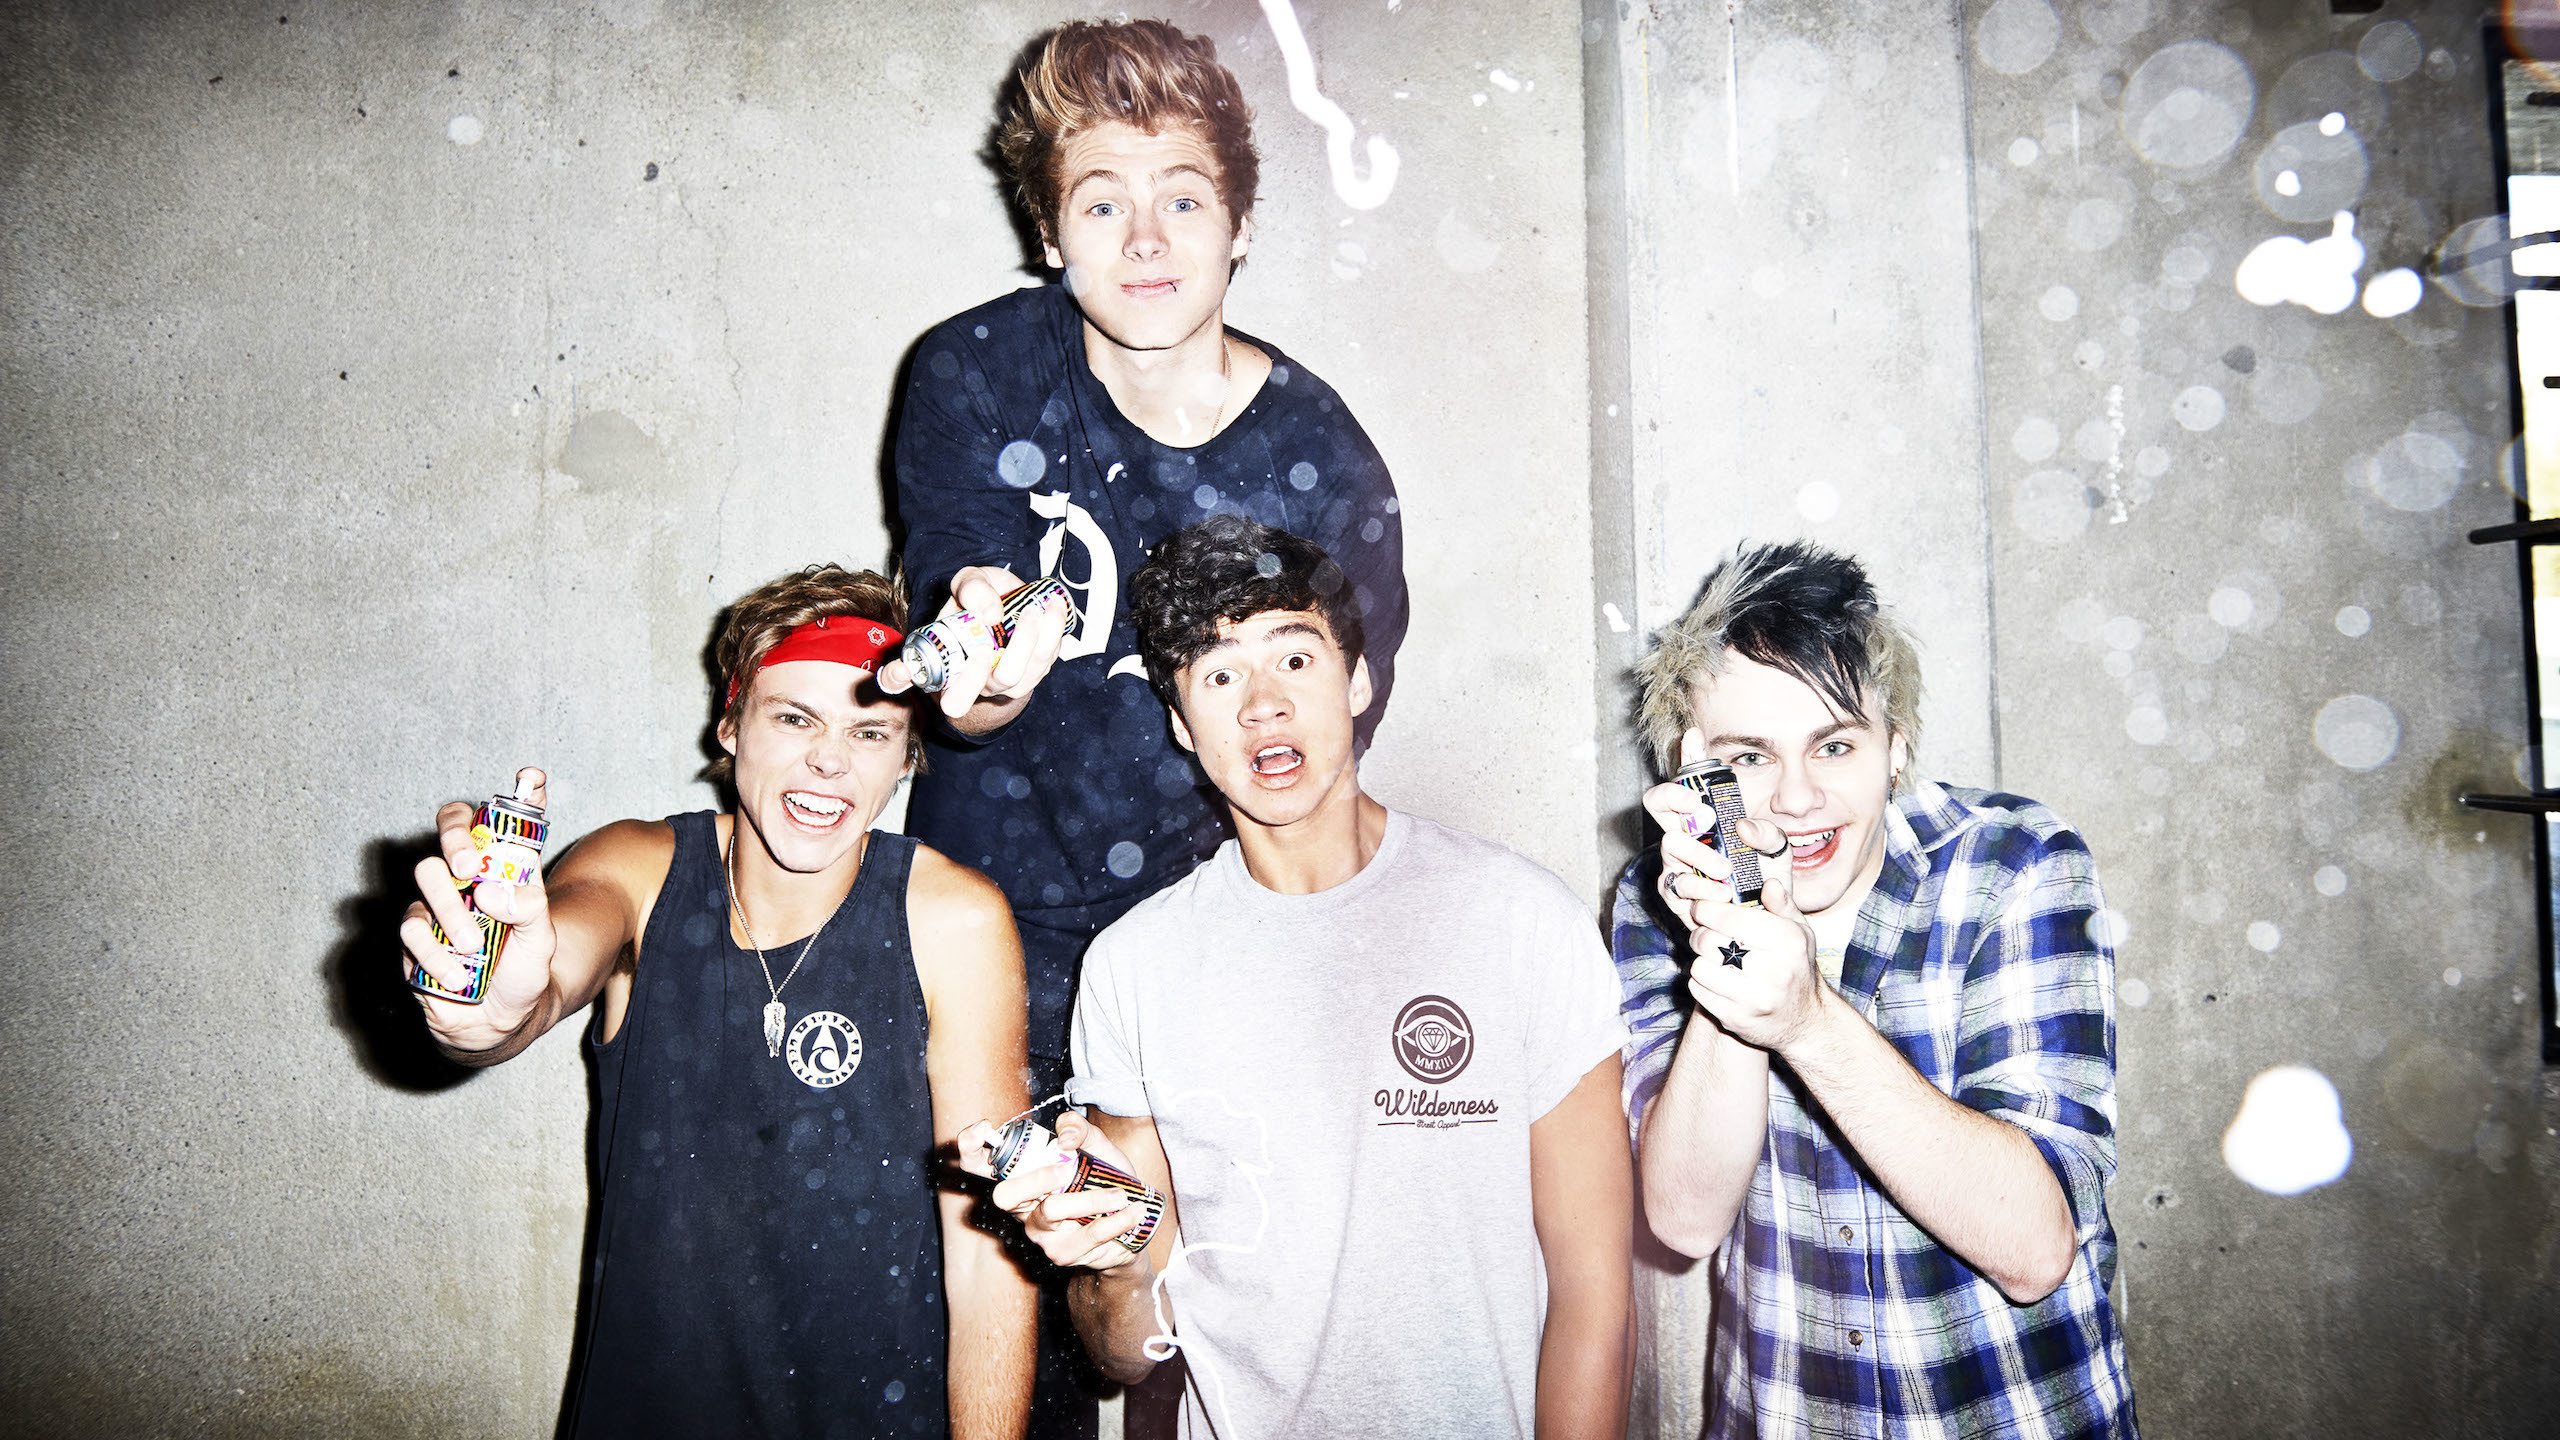 2560x1440 Australia's 5 Seconds Of Summer Declared 'Worst Band' By NME, Again